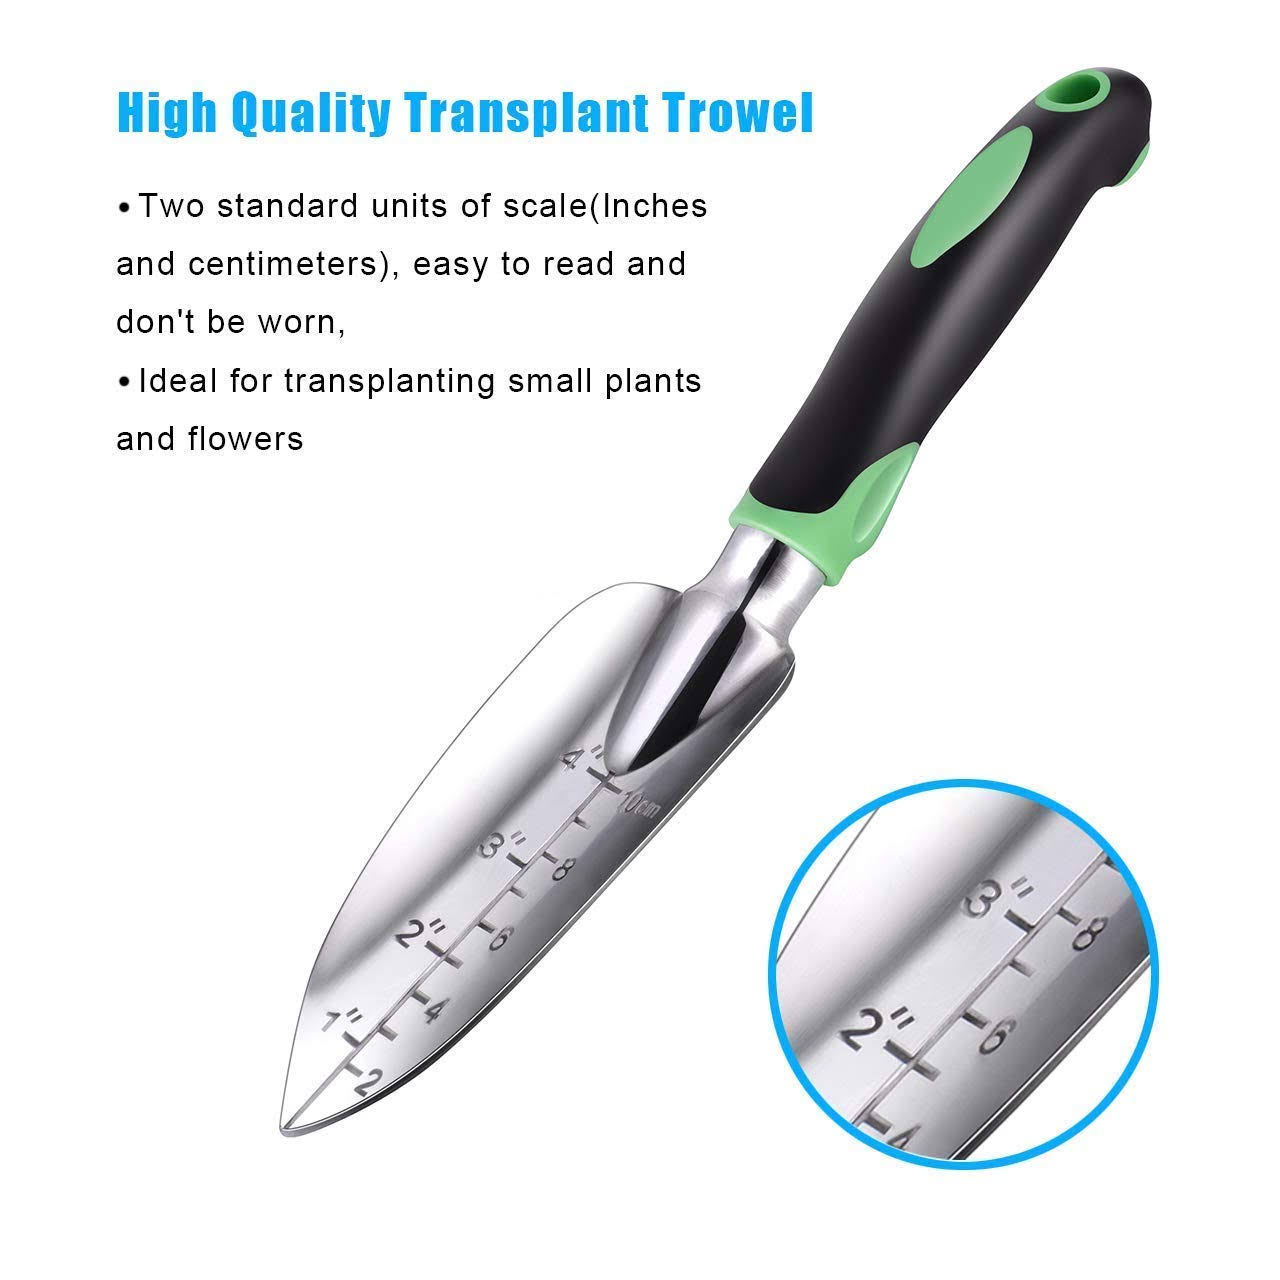 Garden Tool Set 3 Pack Aluminum Heavy Duty Gardening Kit Includes Hand Trowel Transplant Trowel and Cultivator Hand Rake with Soft Rubberized Non-Slip Ergonomic Handle Garden Gifts